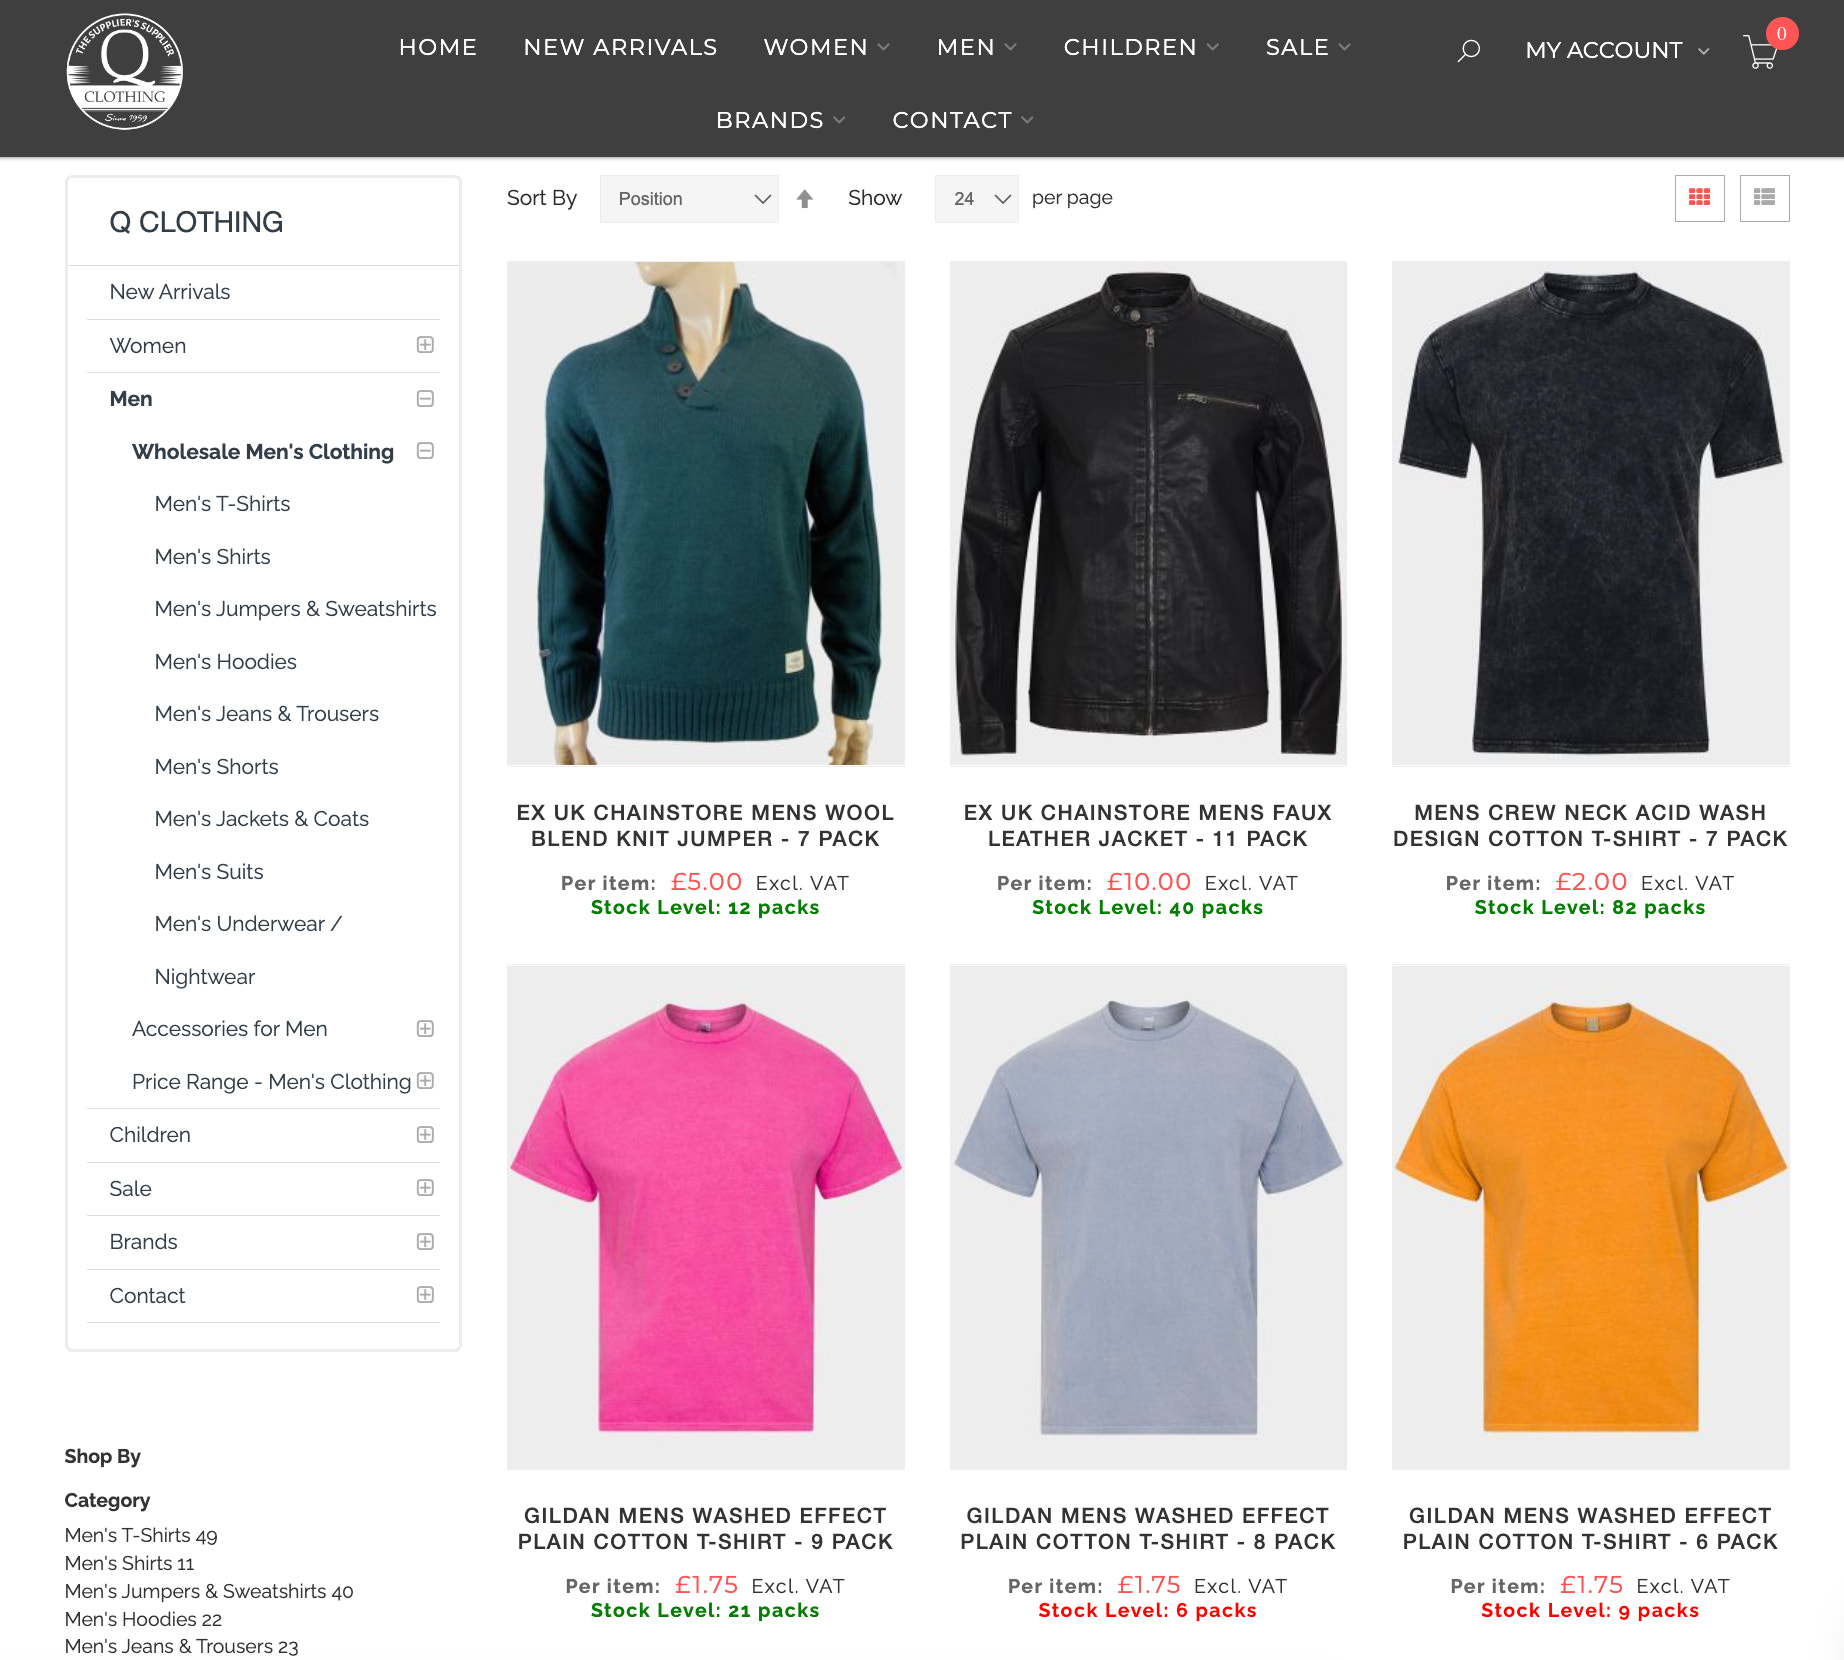 Image of Q Clothing results for men’s clothing